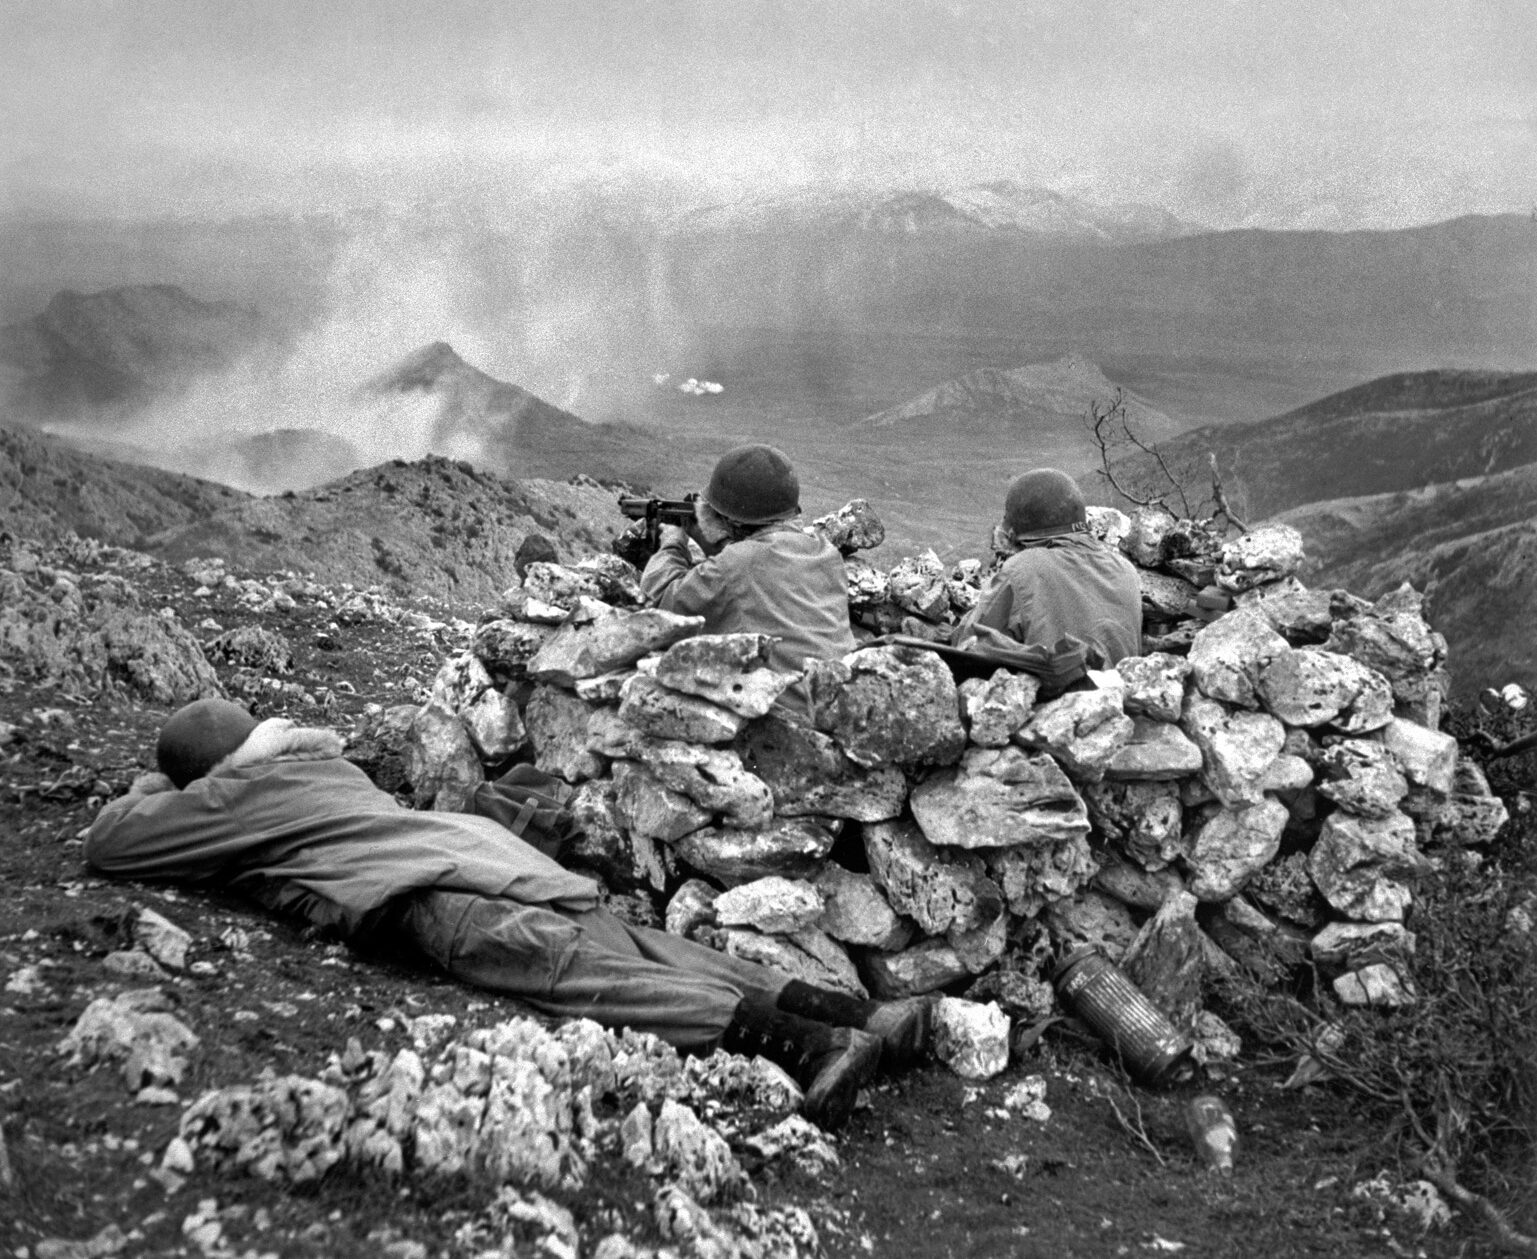 The 1st Special Service Force scaled the heights of Monte La Difensa and subdued the German defenders in a difficult operation in early December 1943. In this photo taken a few weeks later, soldiers of the Force occupy a mountaintop position near the embattled town of Cassino, Italy.